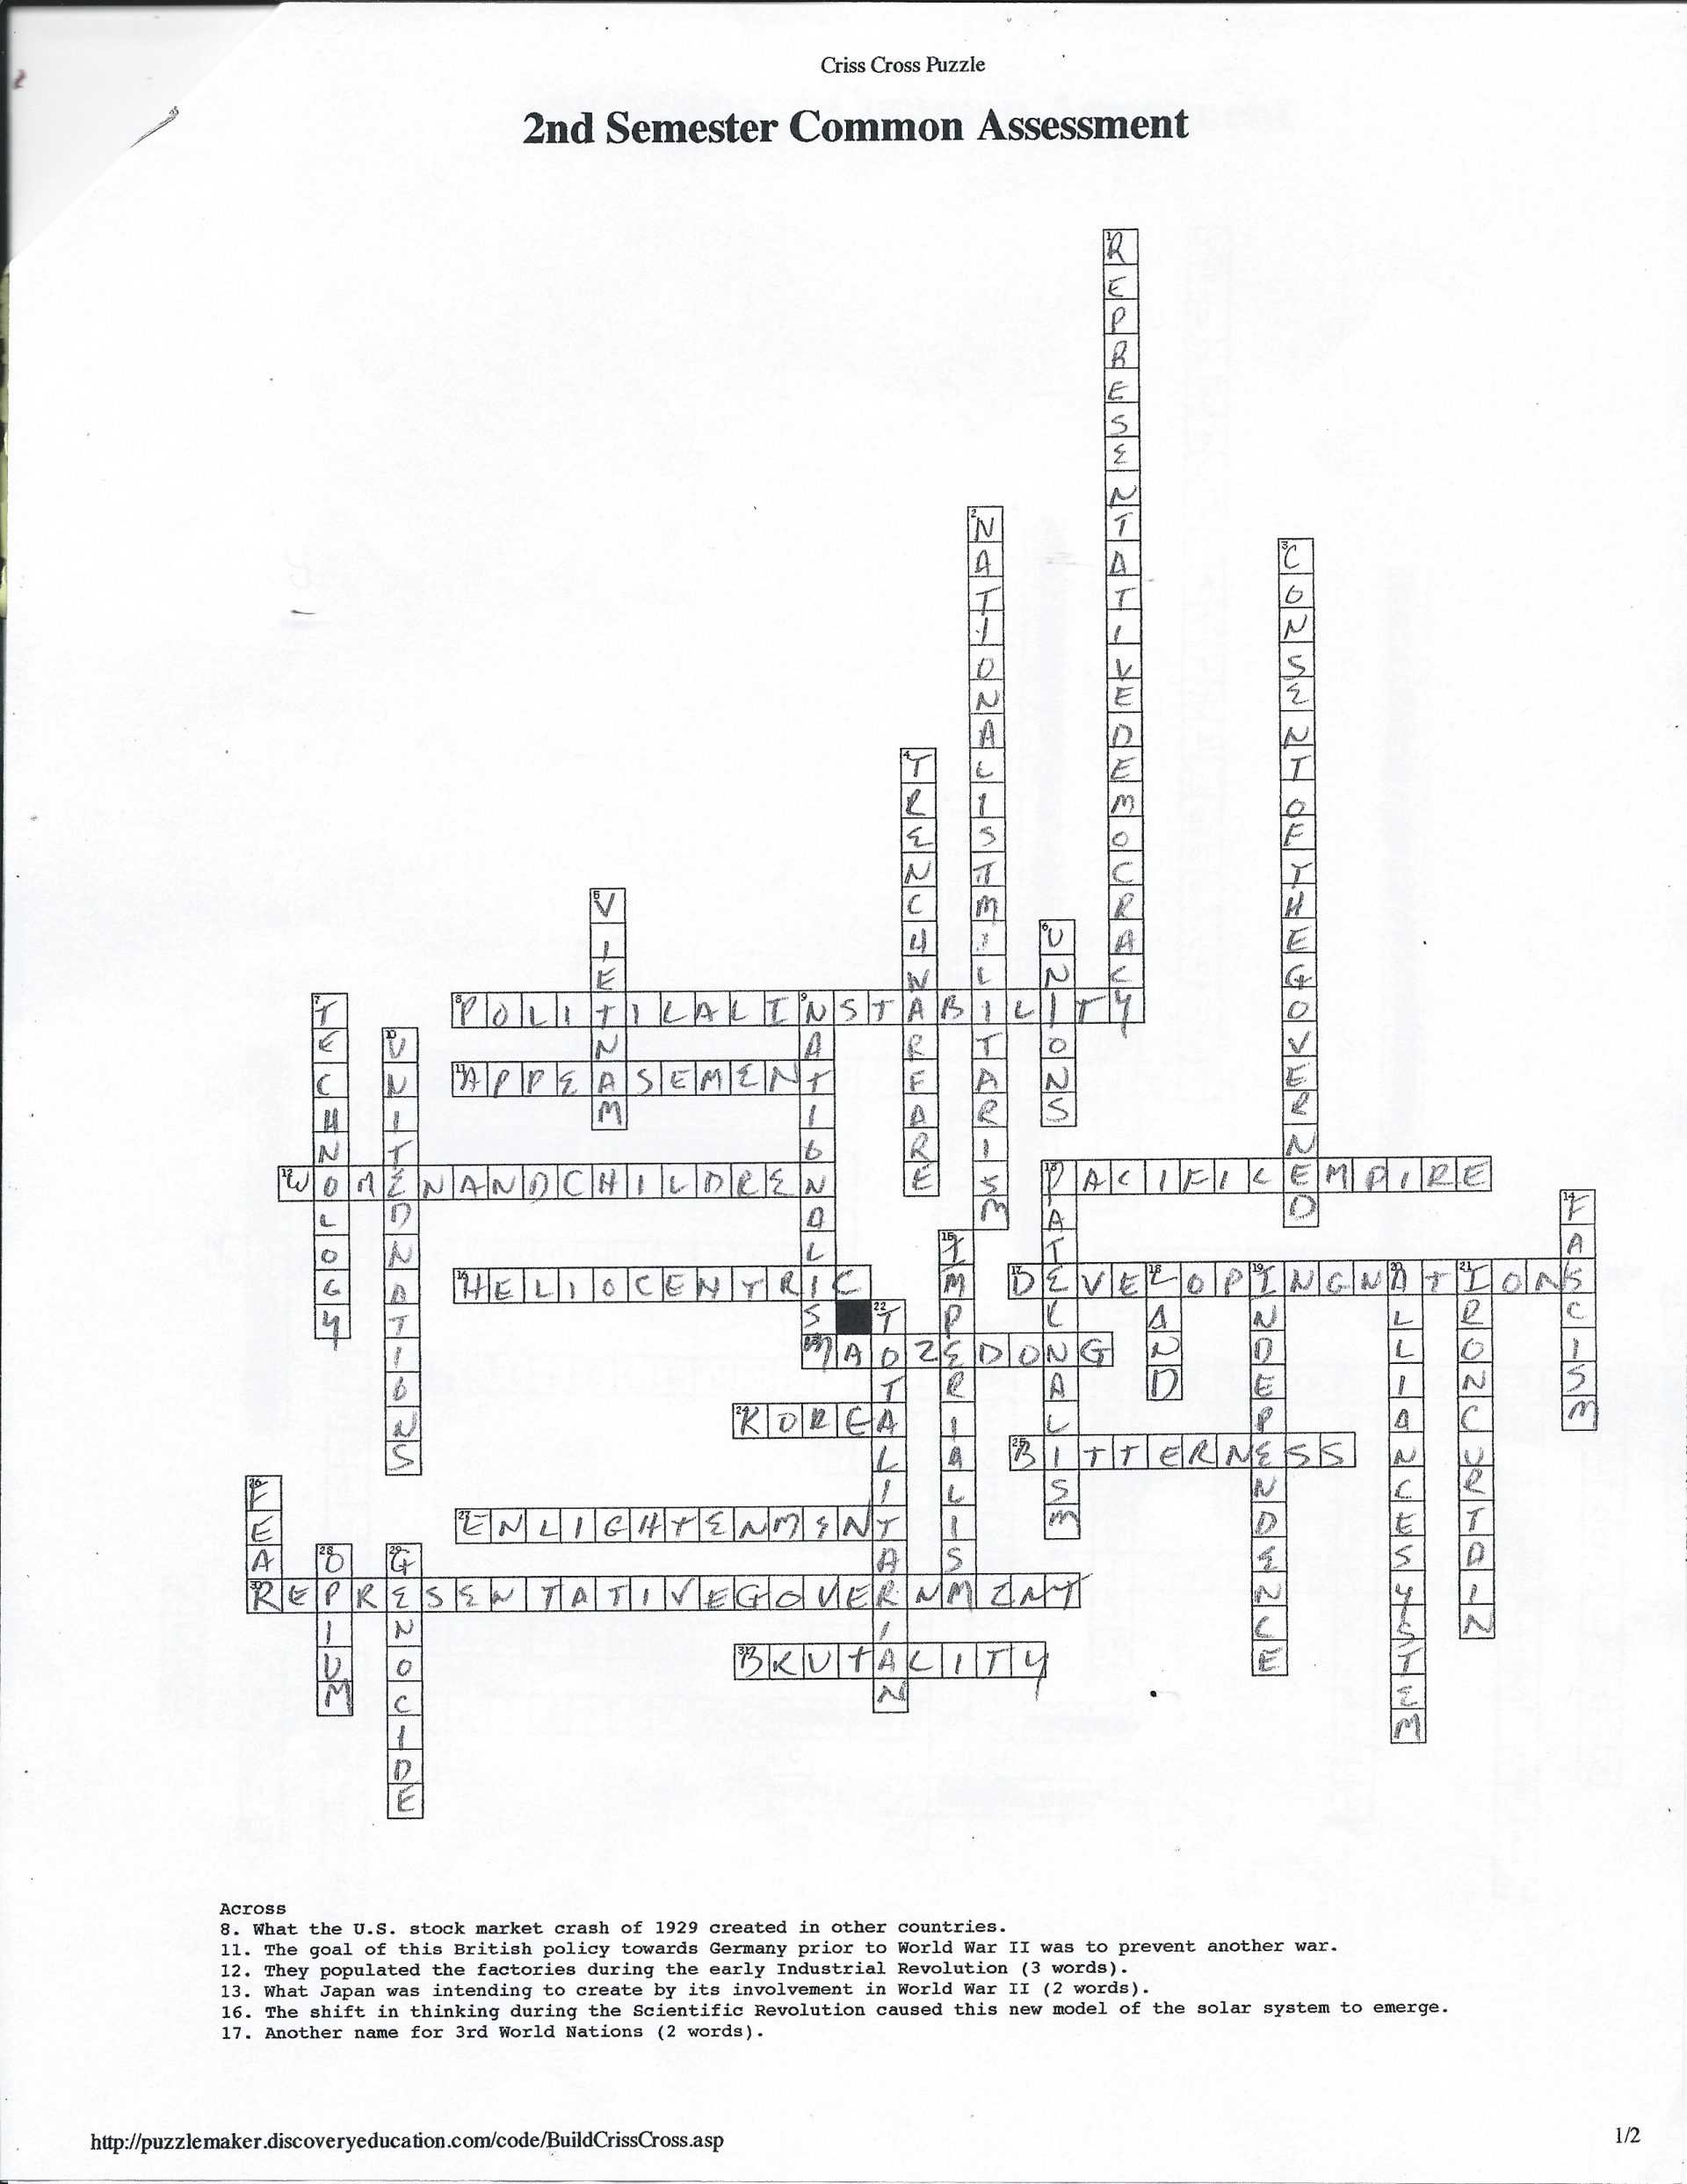 The Enlightenment Worksheet Answer Key and Crossword the Scientific Revolution Puzzle Answers and Enlightenment